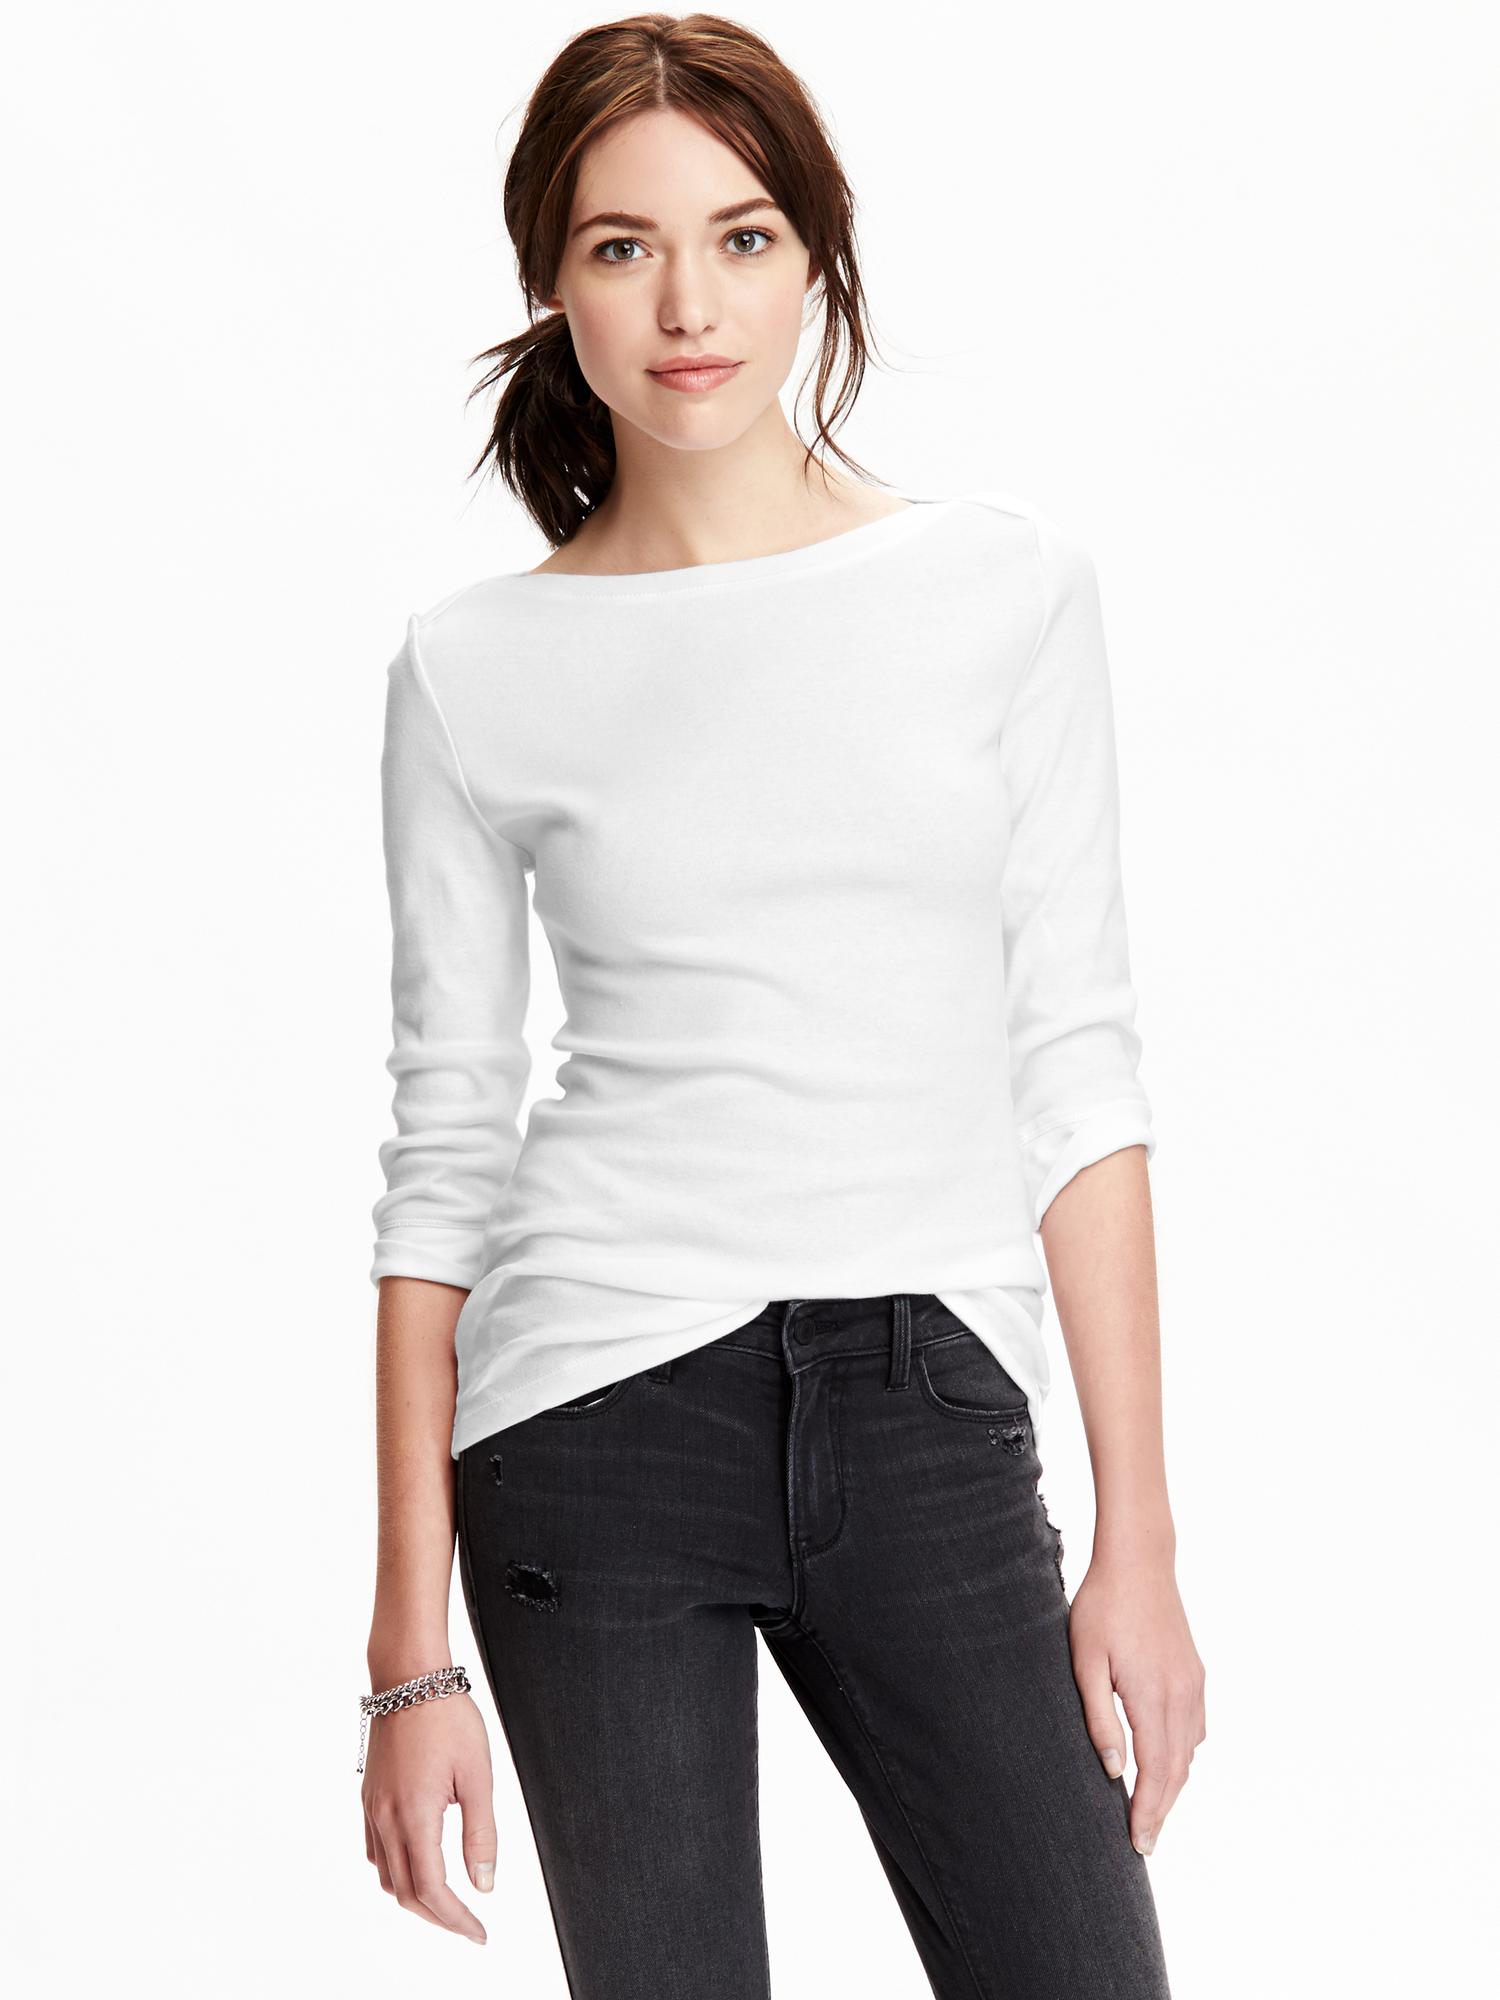 3/4-Sleeve Boat-Neck Top | Old Navy